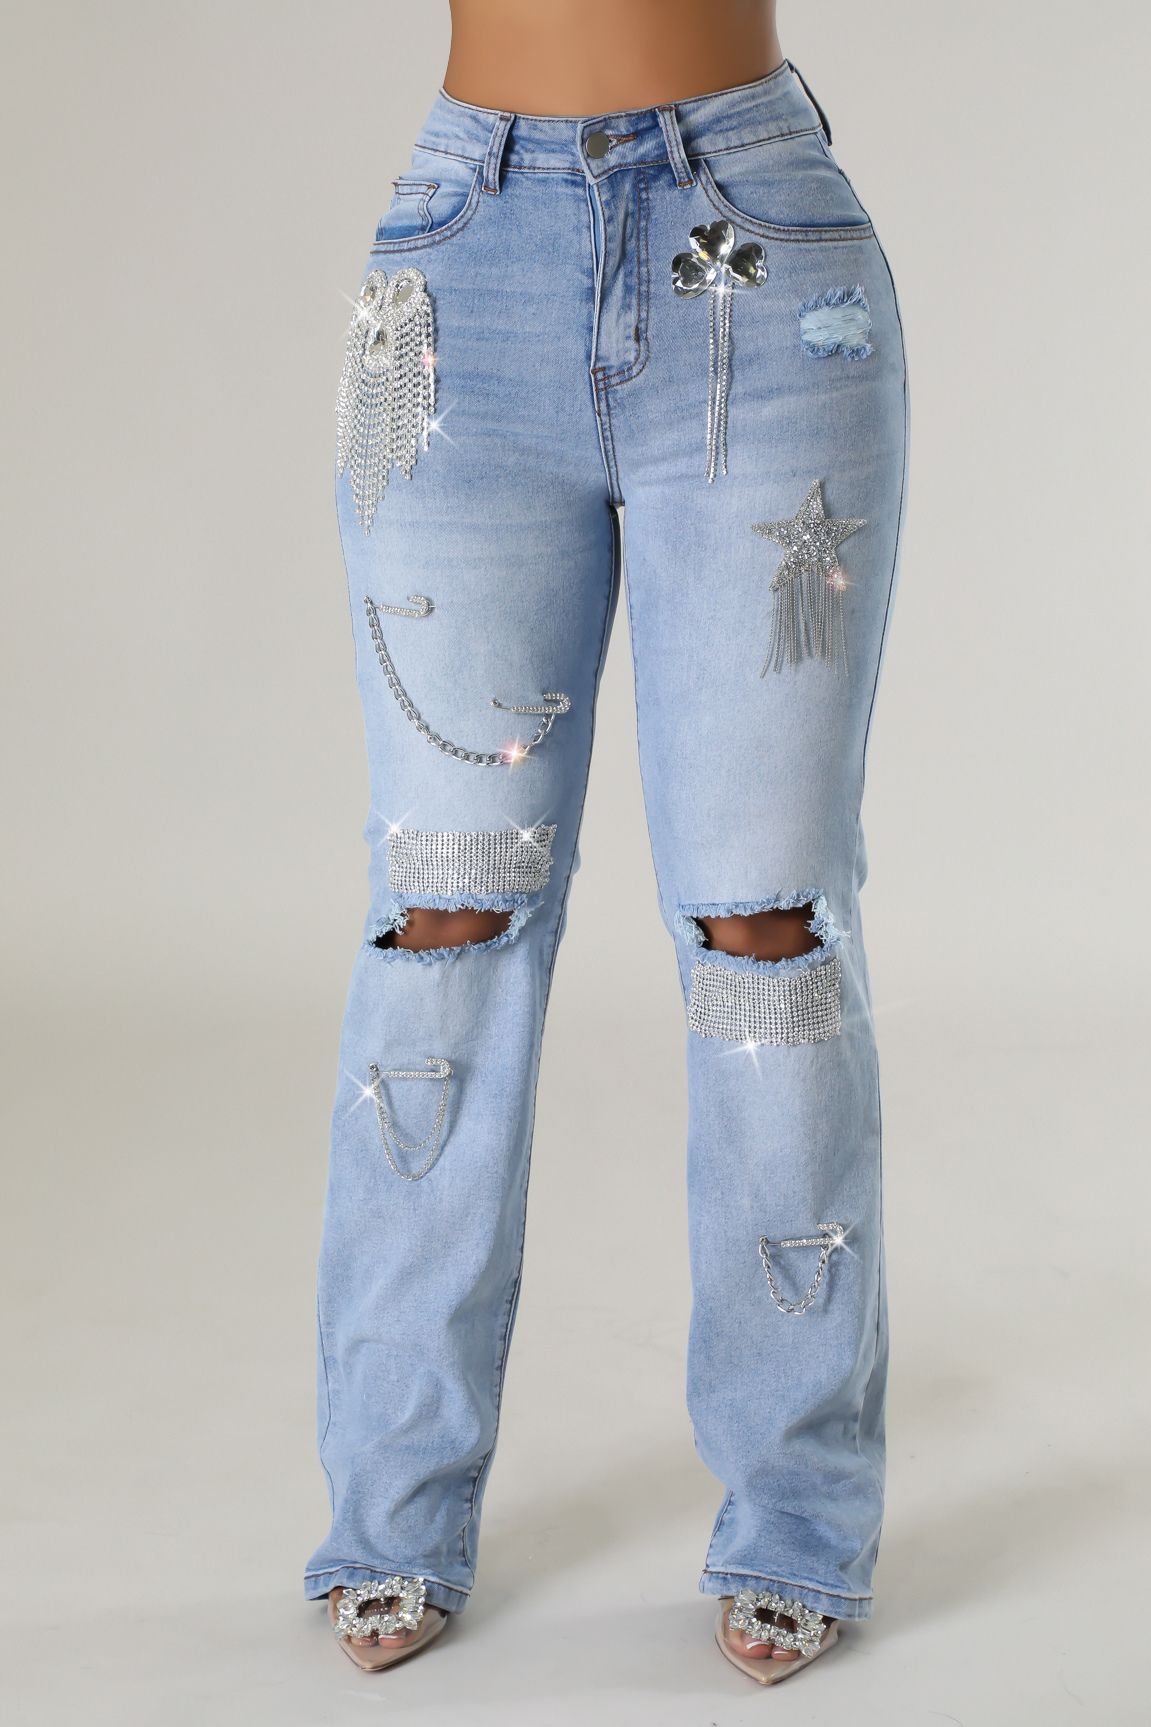 Concert Ready Jeans